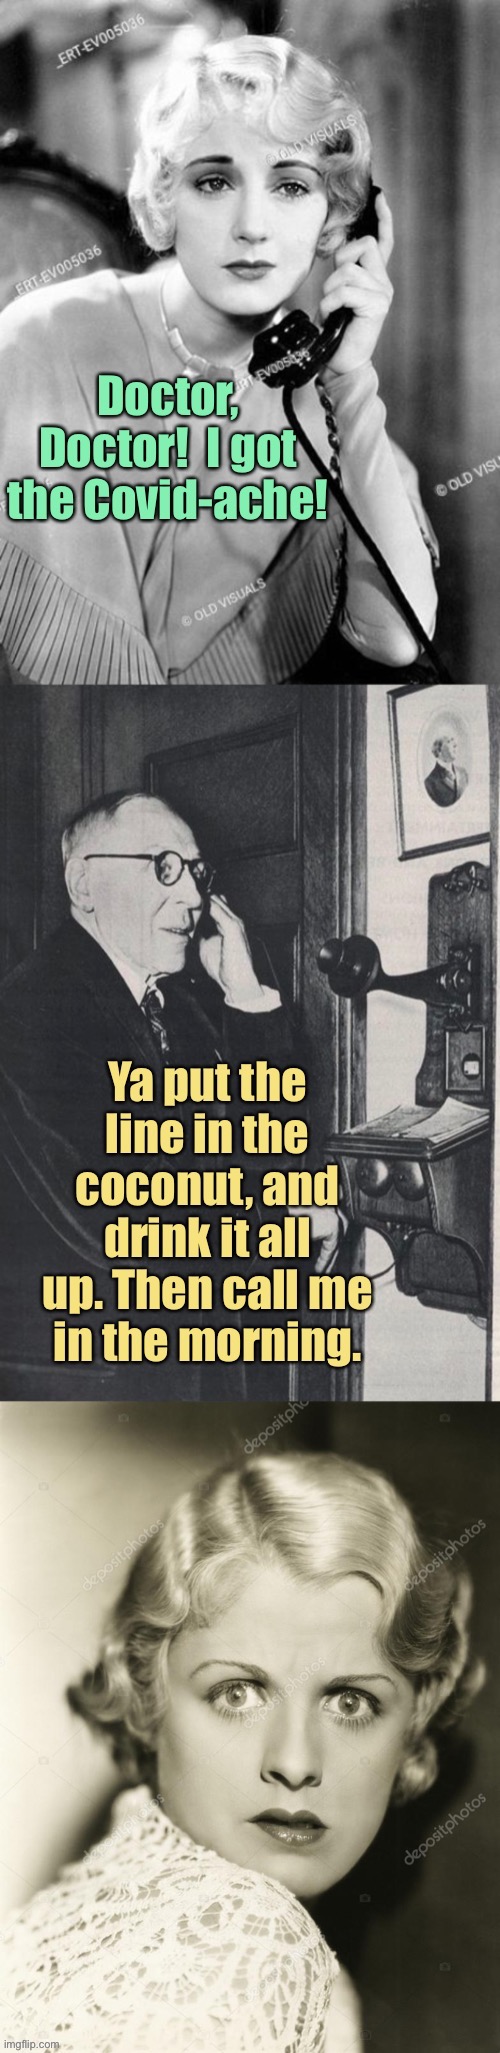 A cure! At last! | image tagged in lime in the coconut,call doctor,covid-19 | made w/ Imgflip meme maker